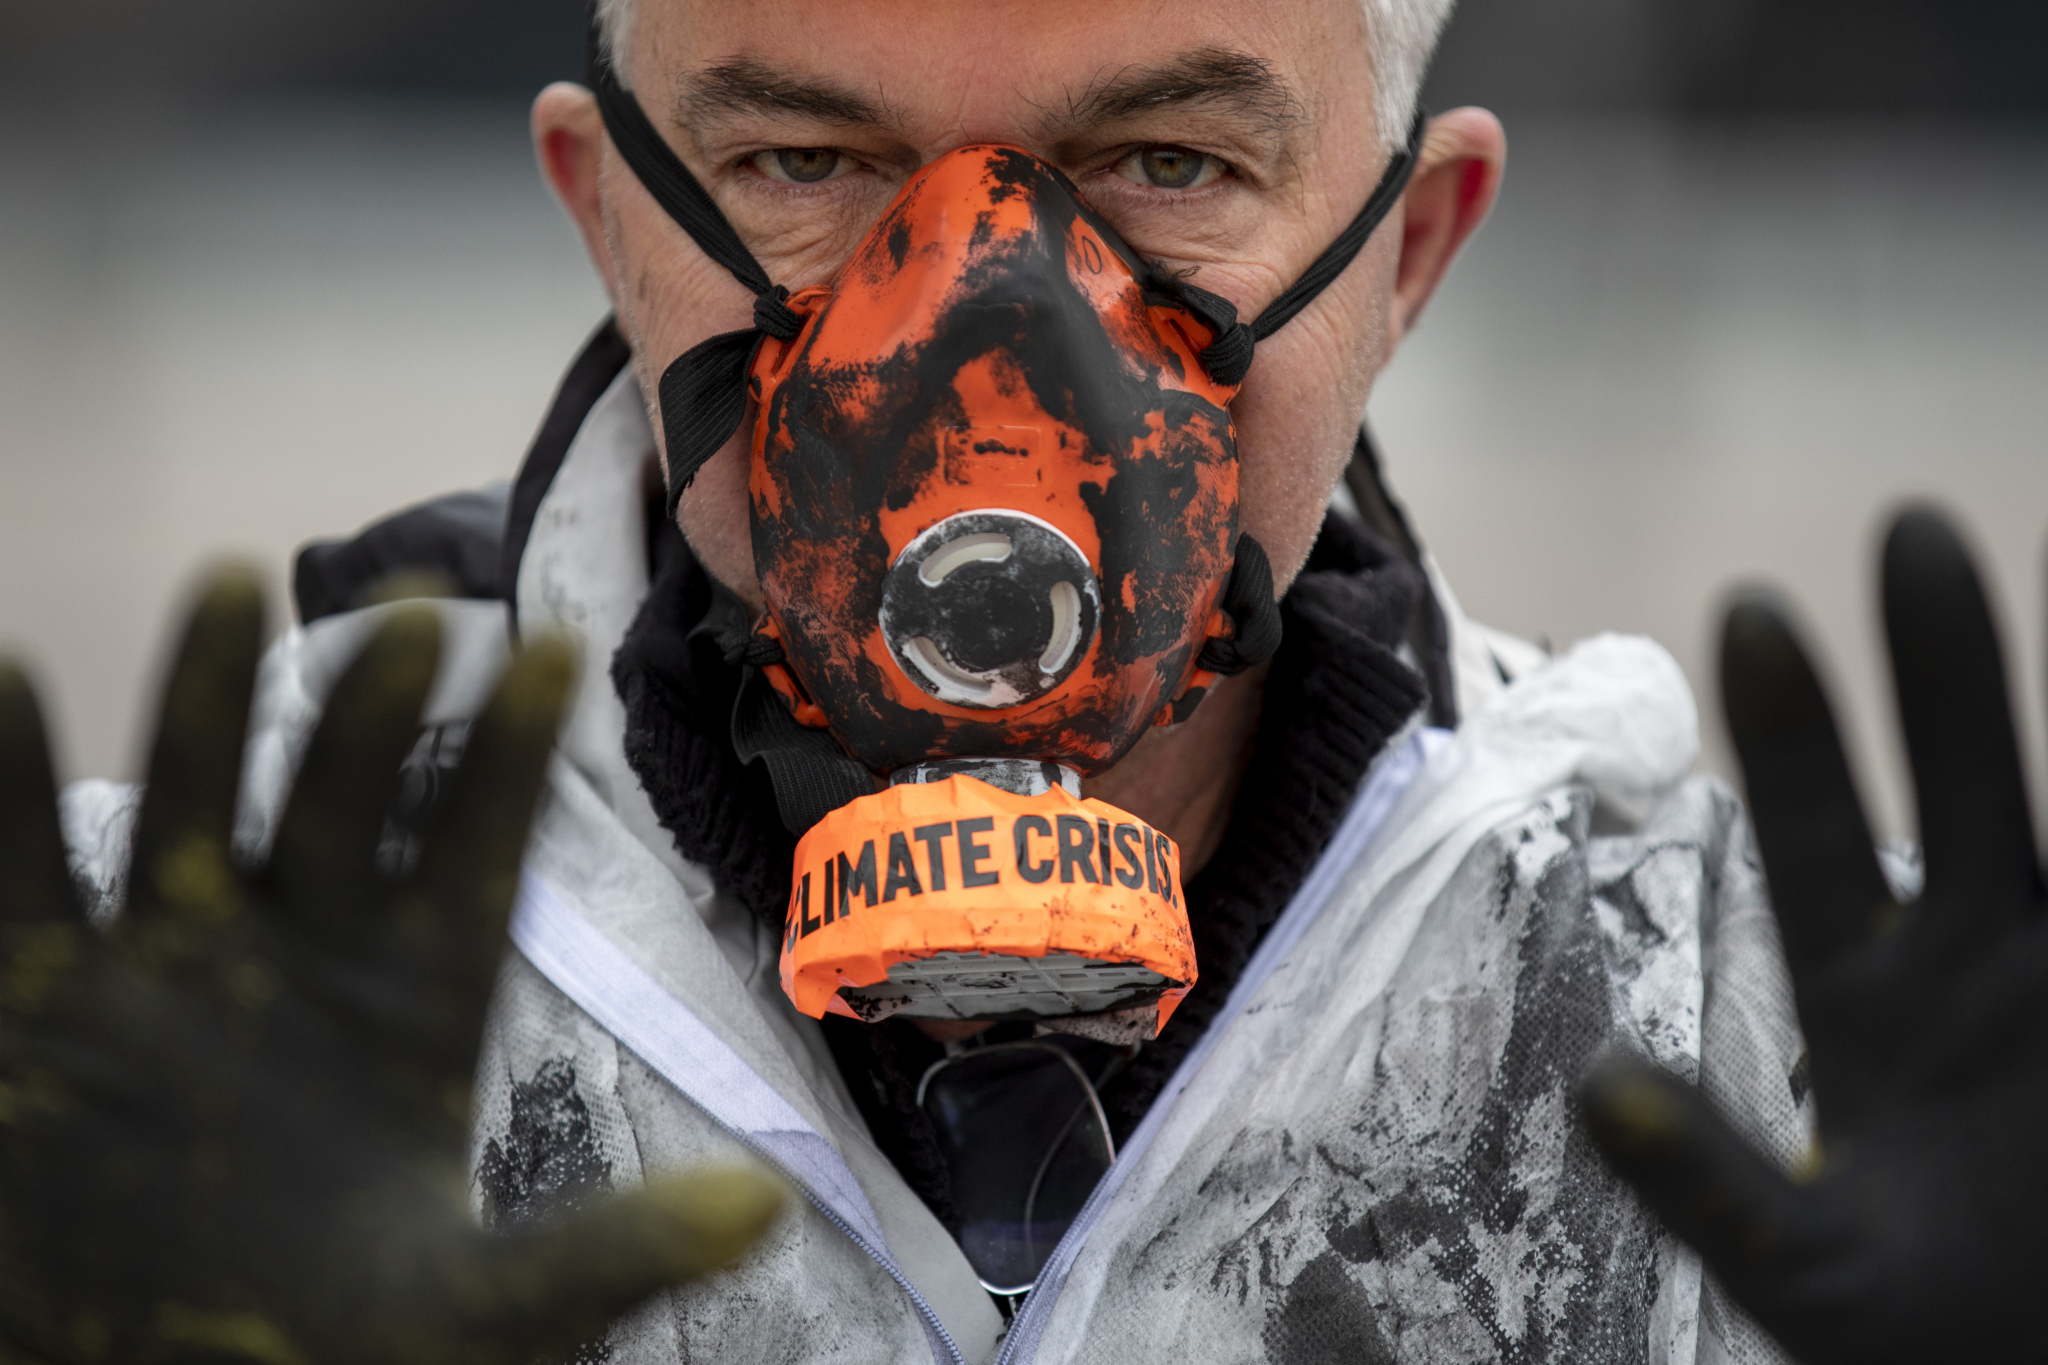 a protestor holds up hands painted black to symbolize contamination by an oil company
